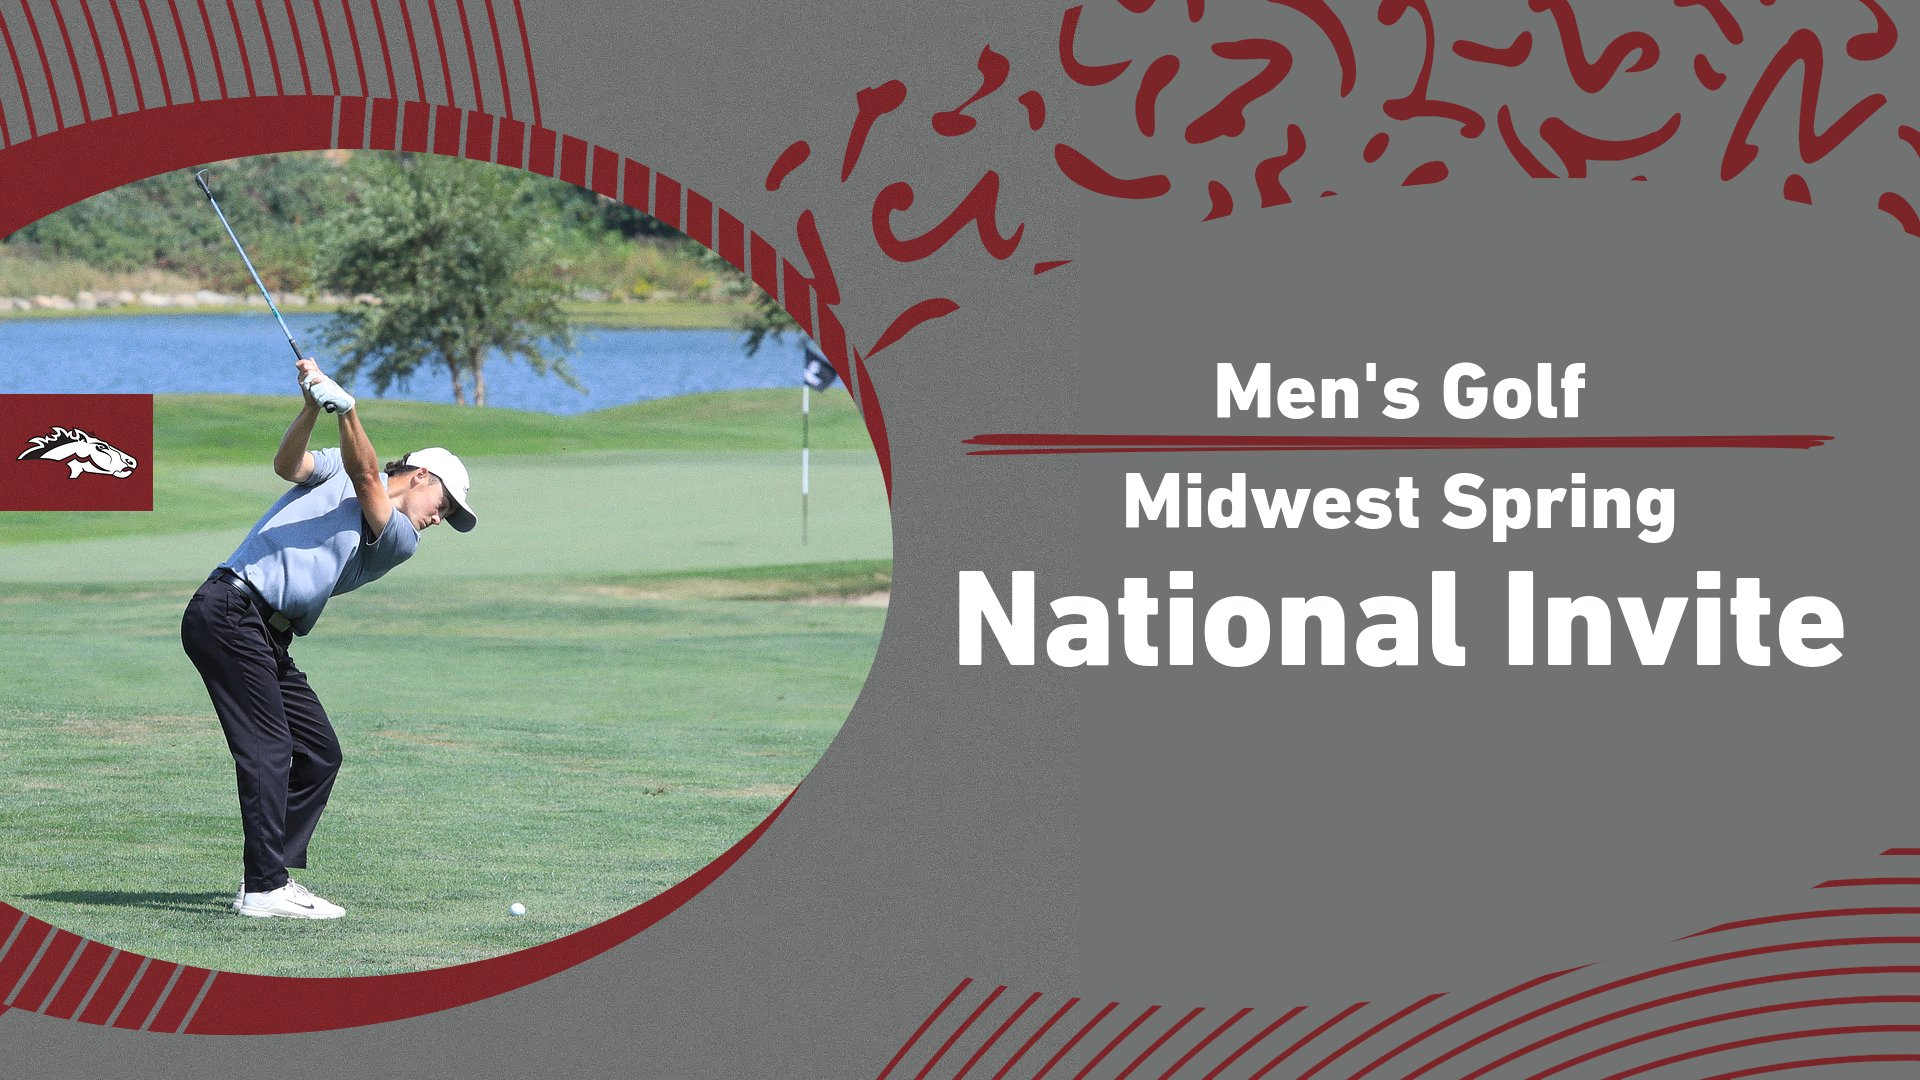 Mustangs compete with nationally ranked field at Midwest Spring National Invite